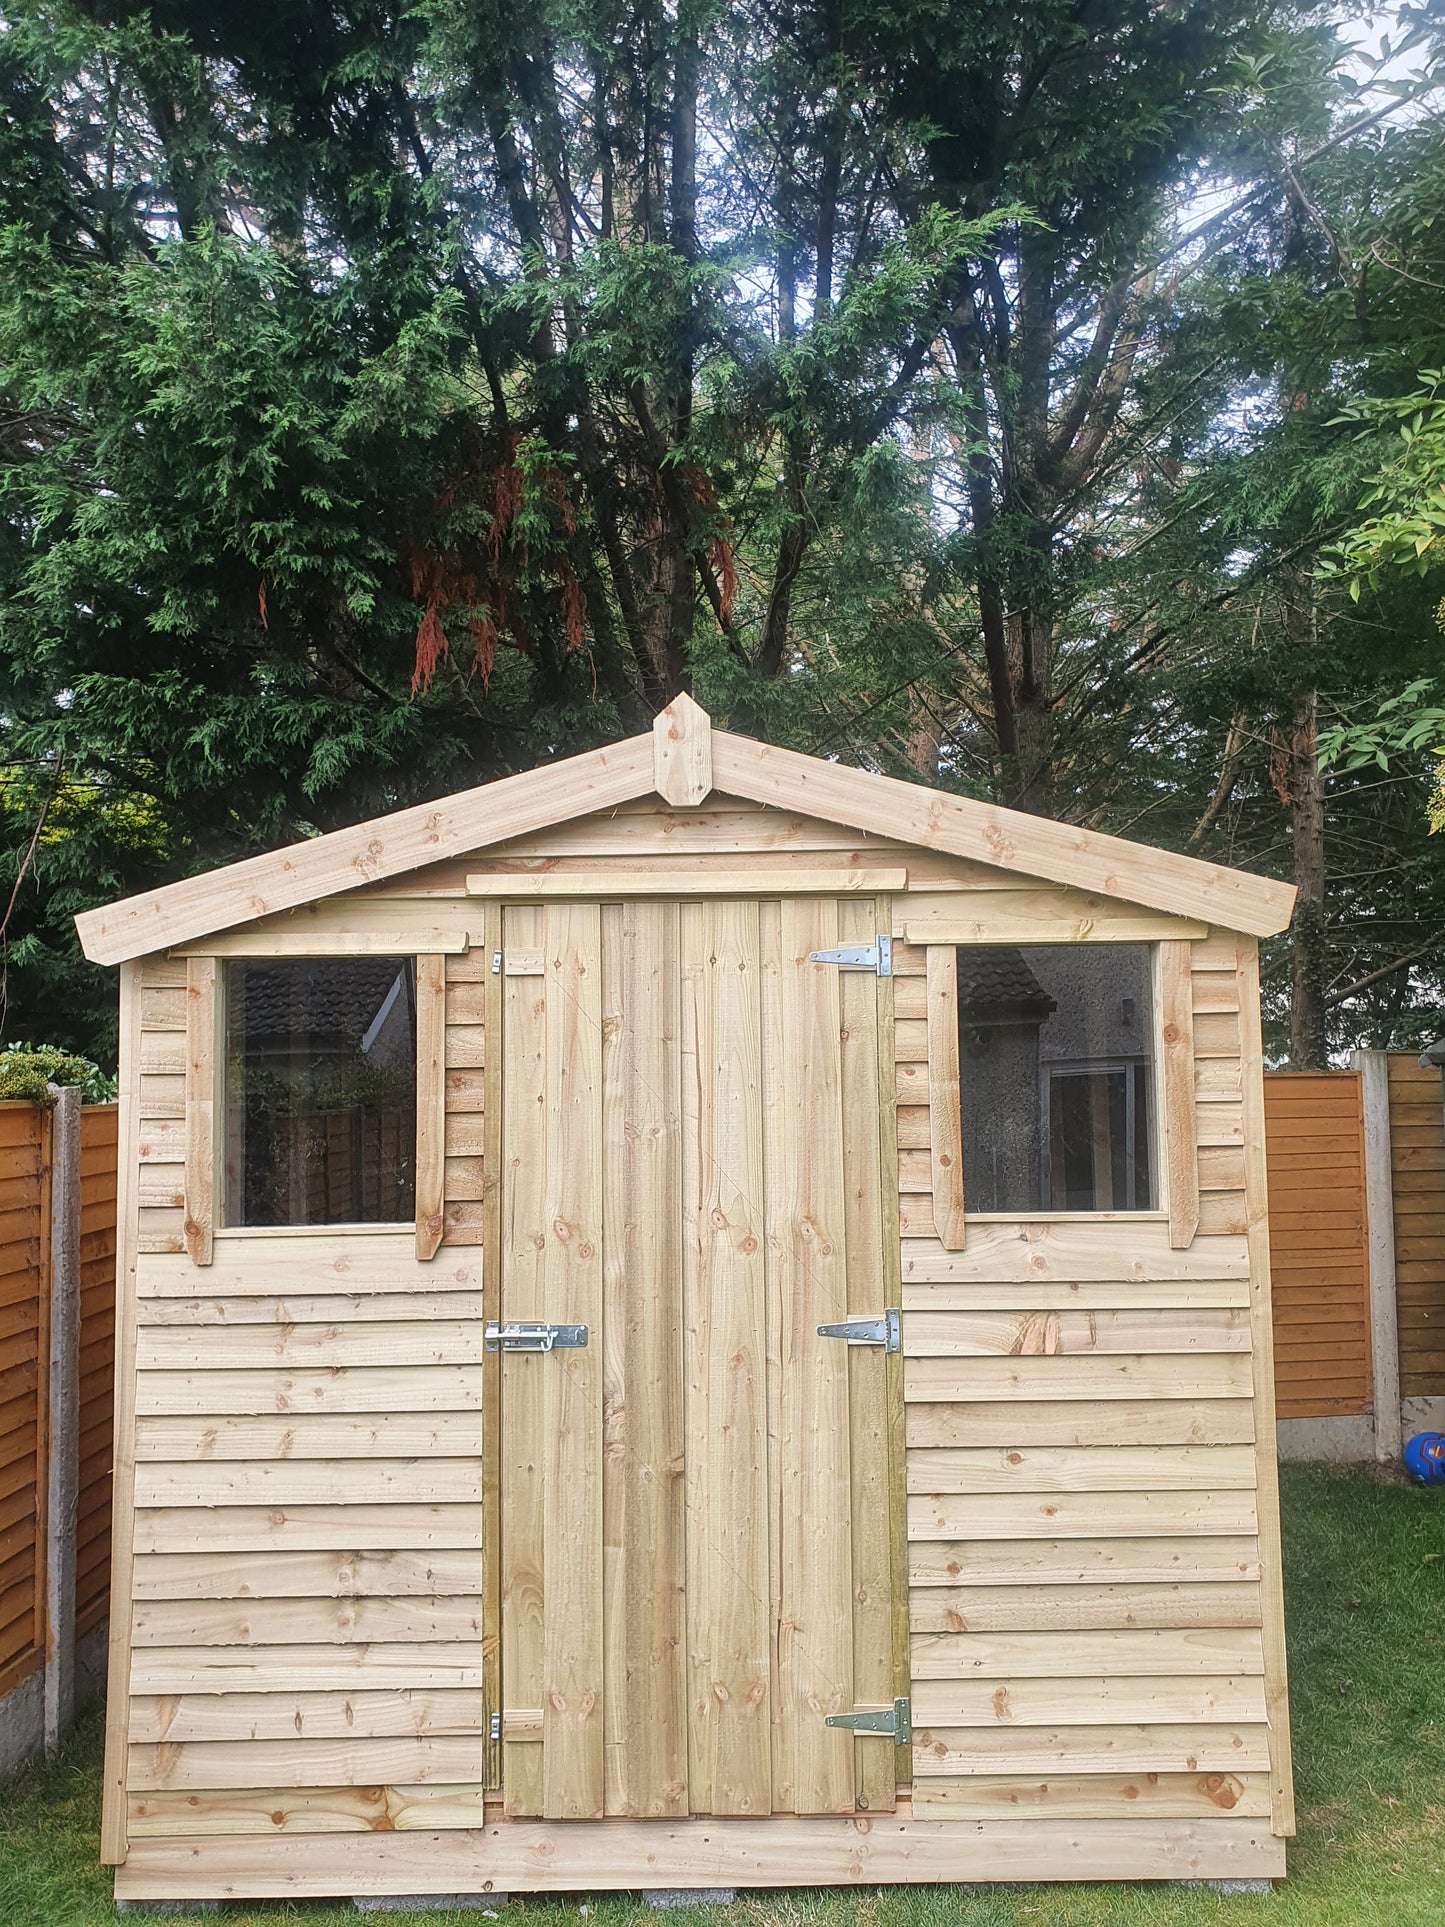 8ft x 8ft Rustic Storm Force Shed - 2 windows